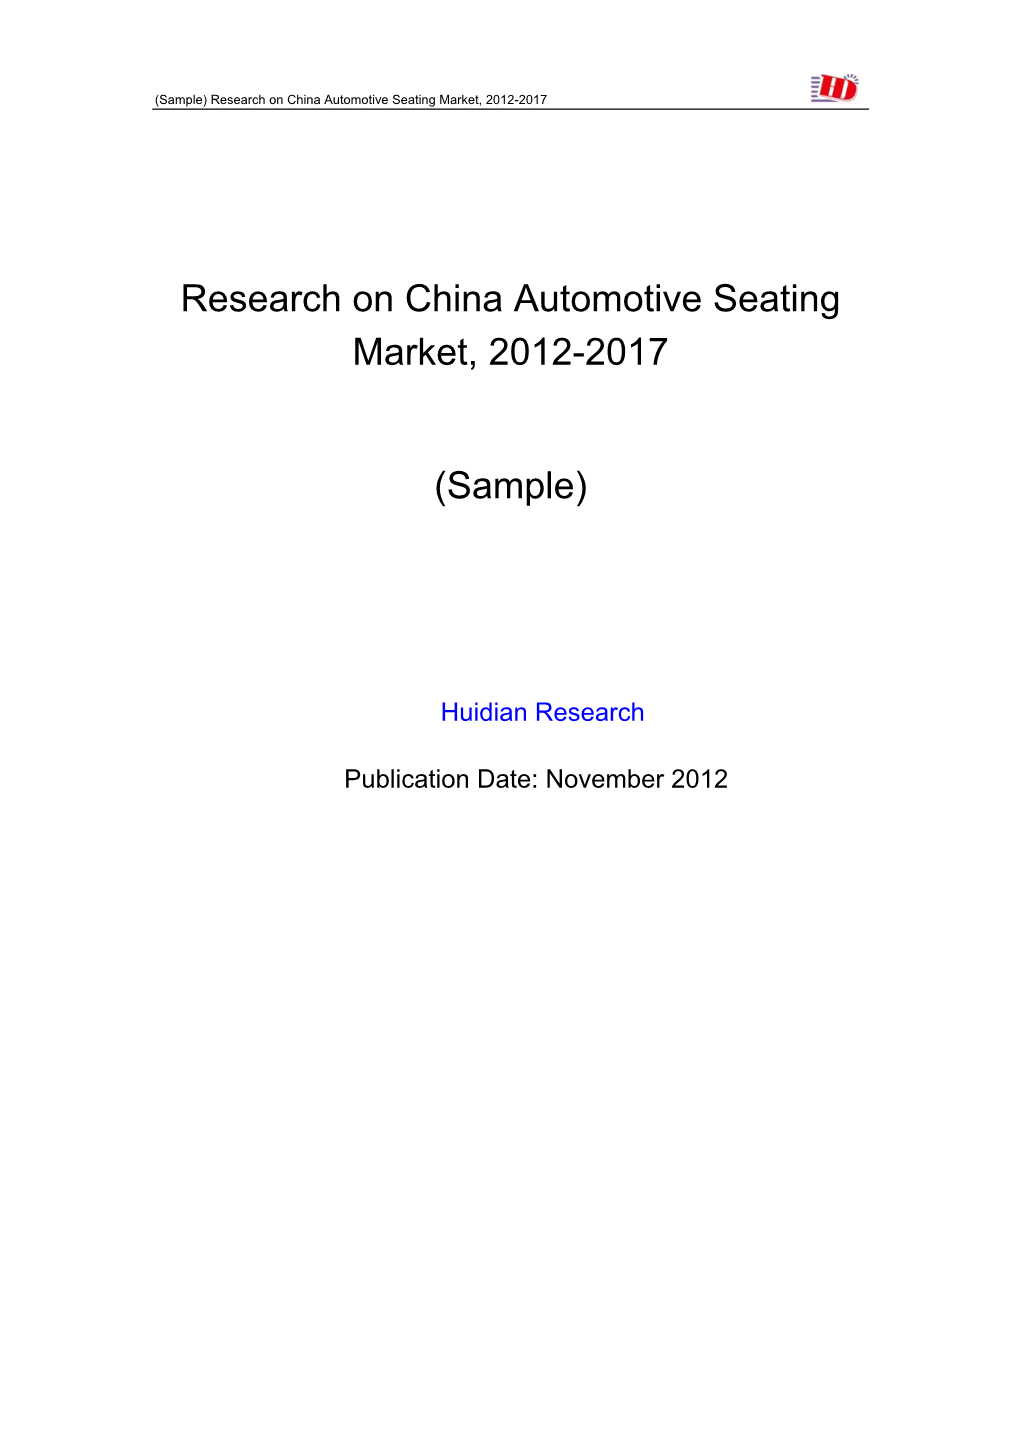 Research on China Automotive Seating Market, 2012-2017 (Sample)